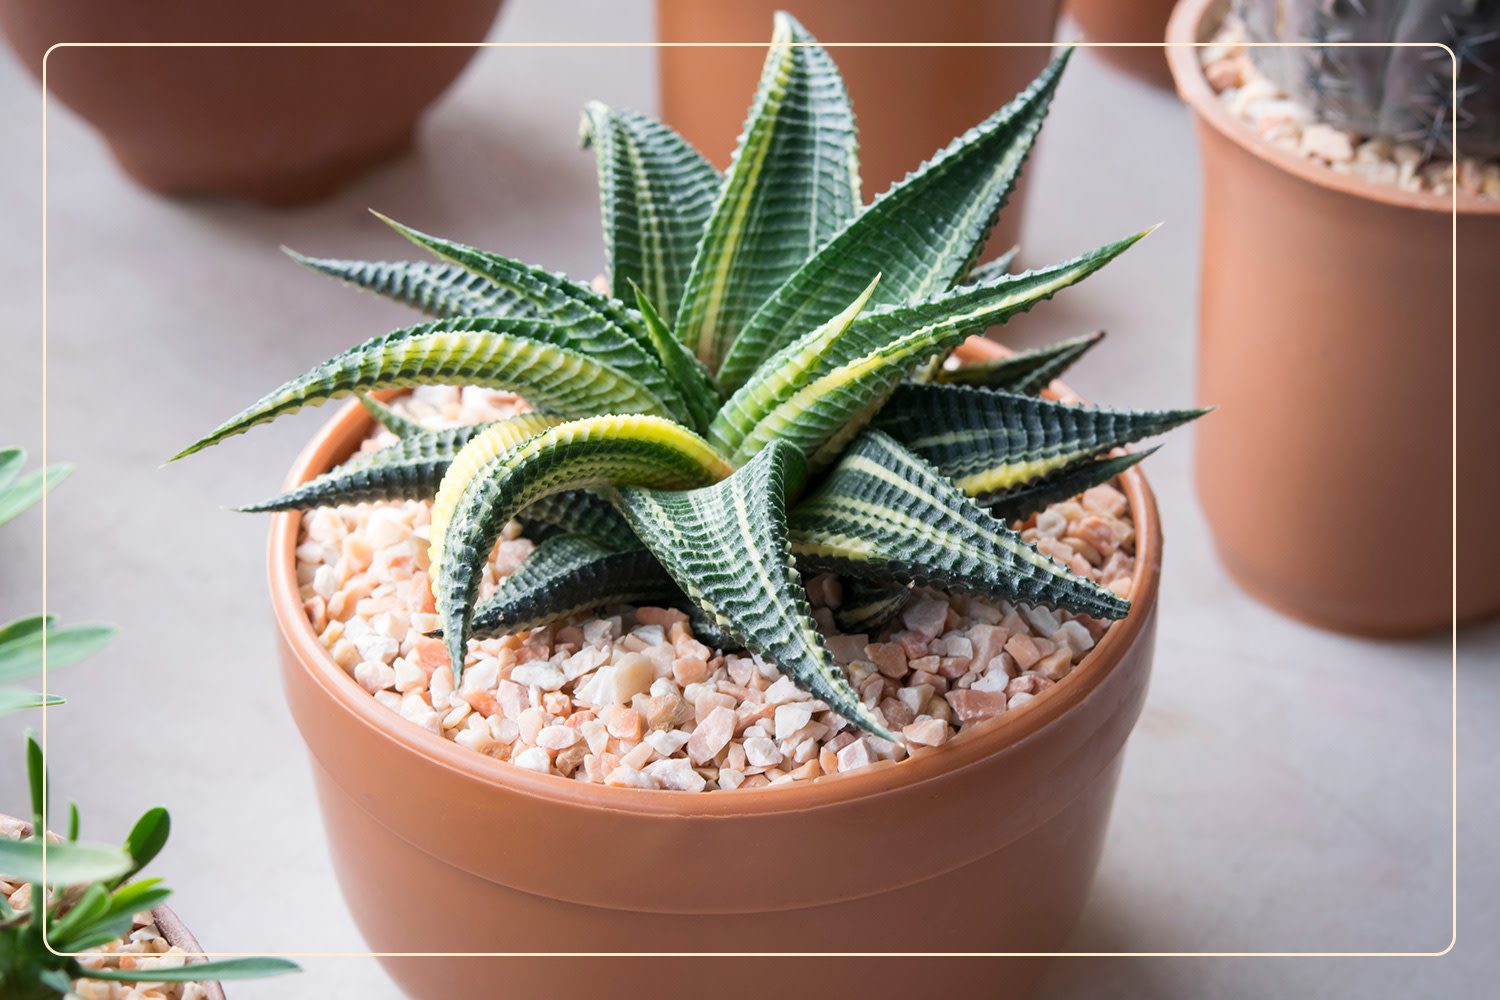 a Haworthia (Haworthiopsis attenuata), which is a pet-safe succulent, grows indoors in a terracotta pot